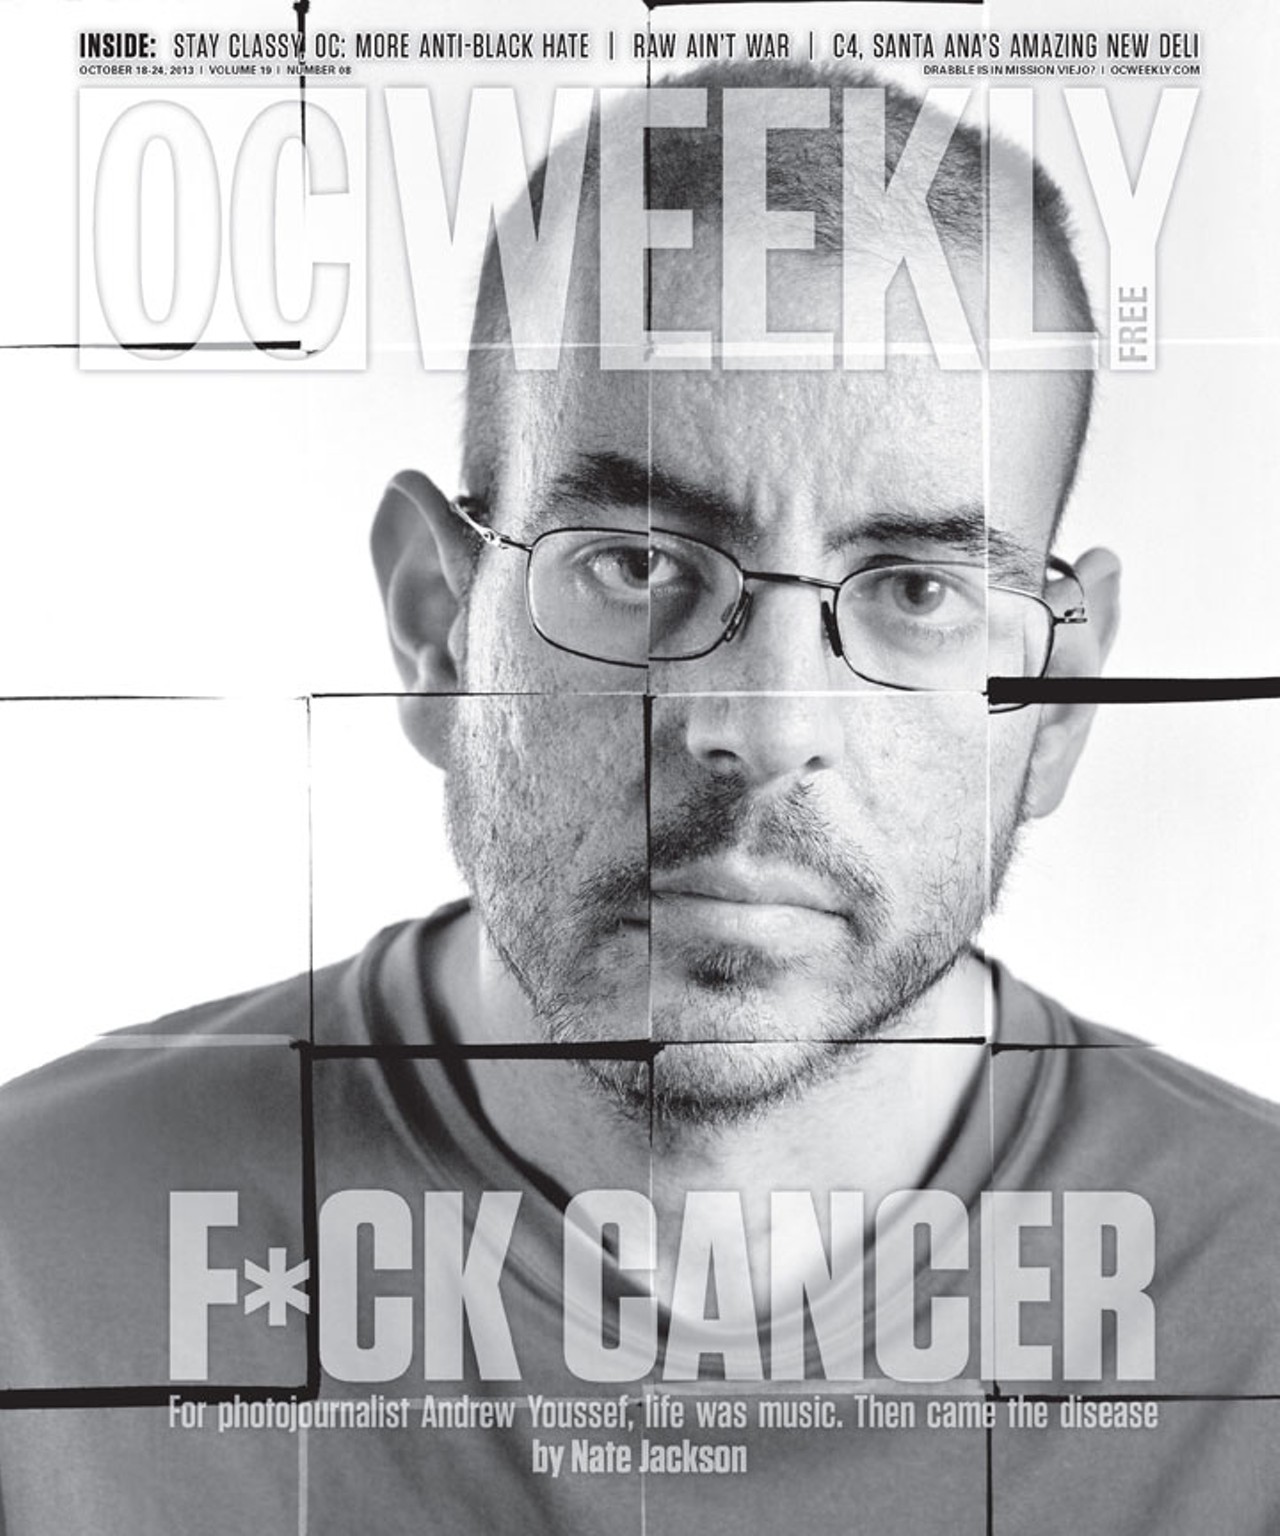 "F*ck Cancer," by Nate Jackson in the OC Weekly.